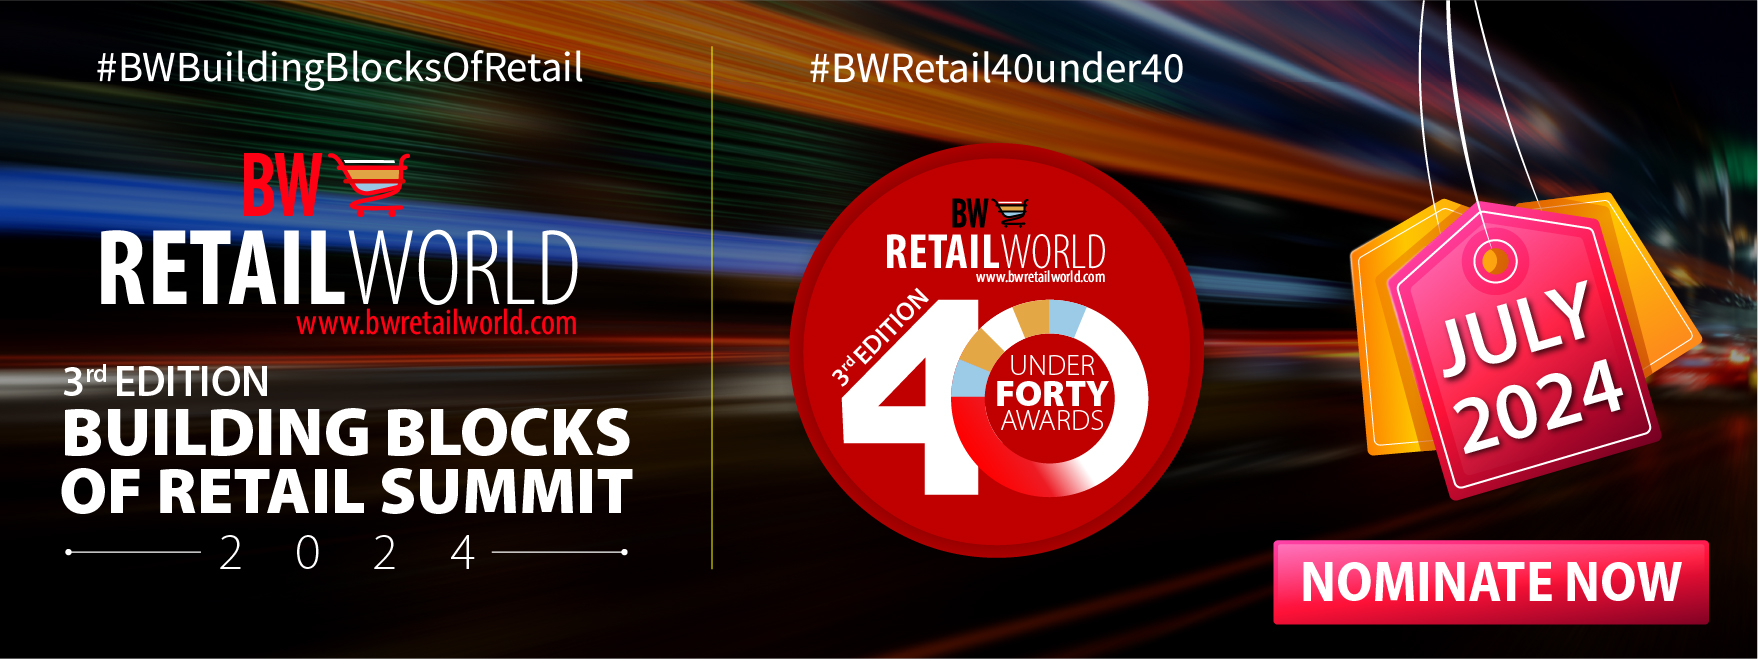 About the Building Blocks of Retail Summit by BW Retail World